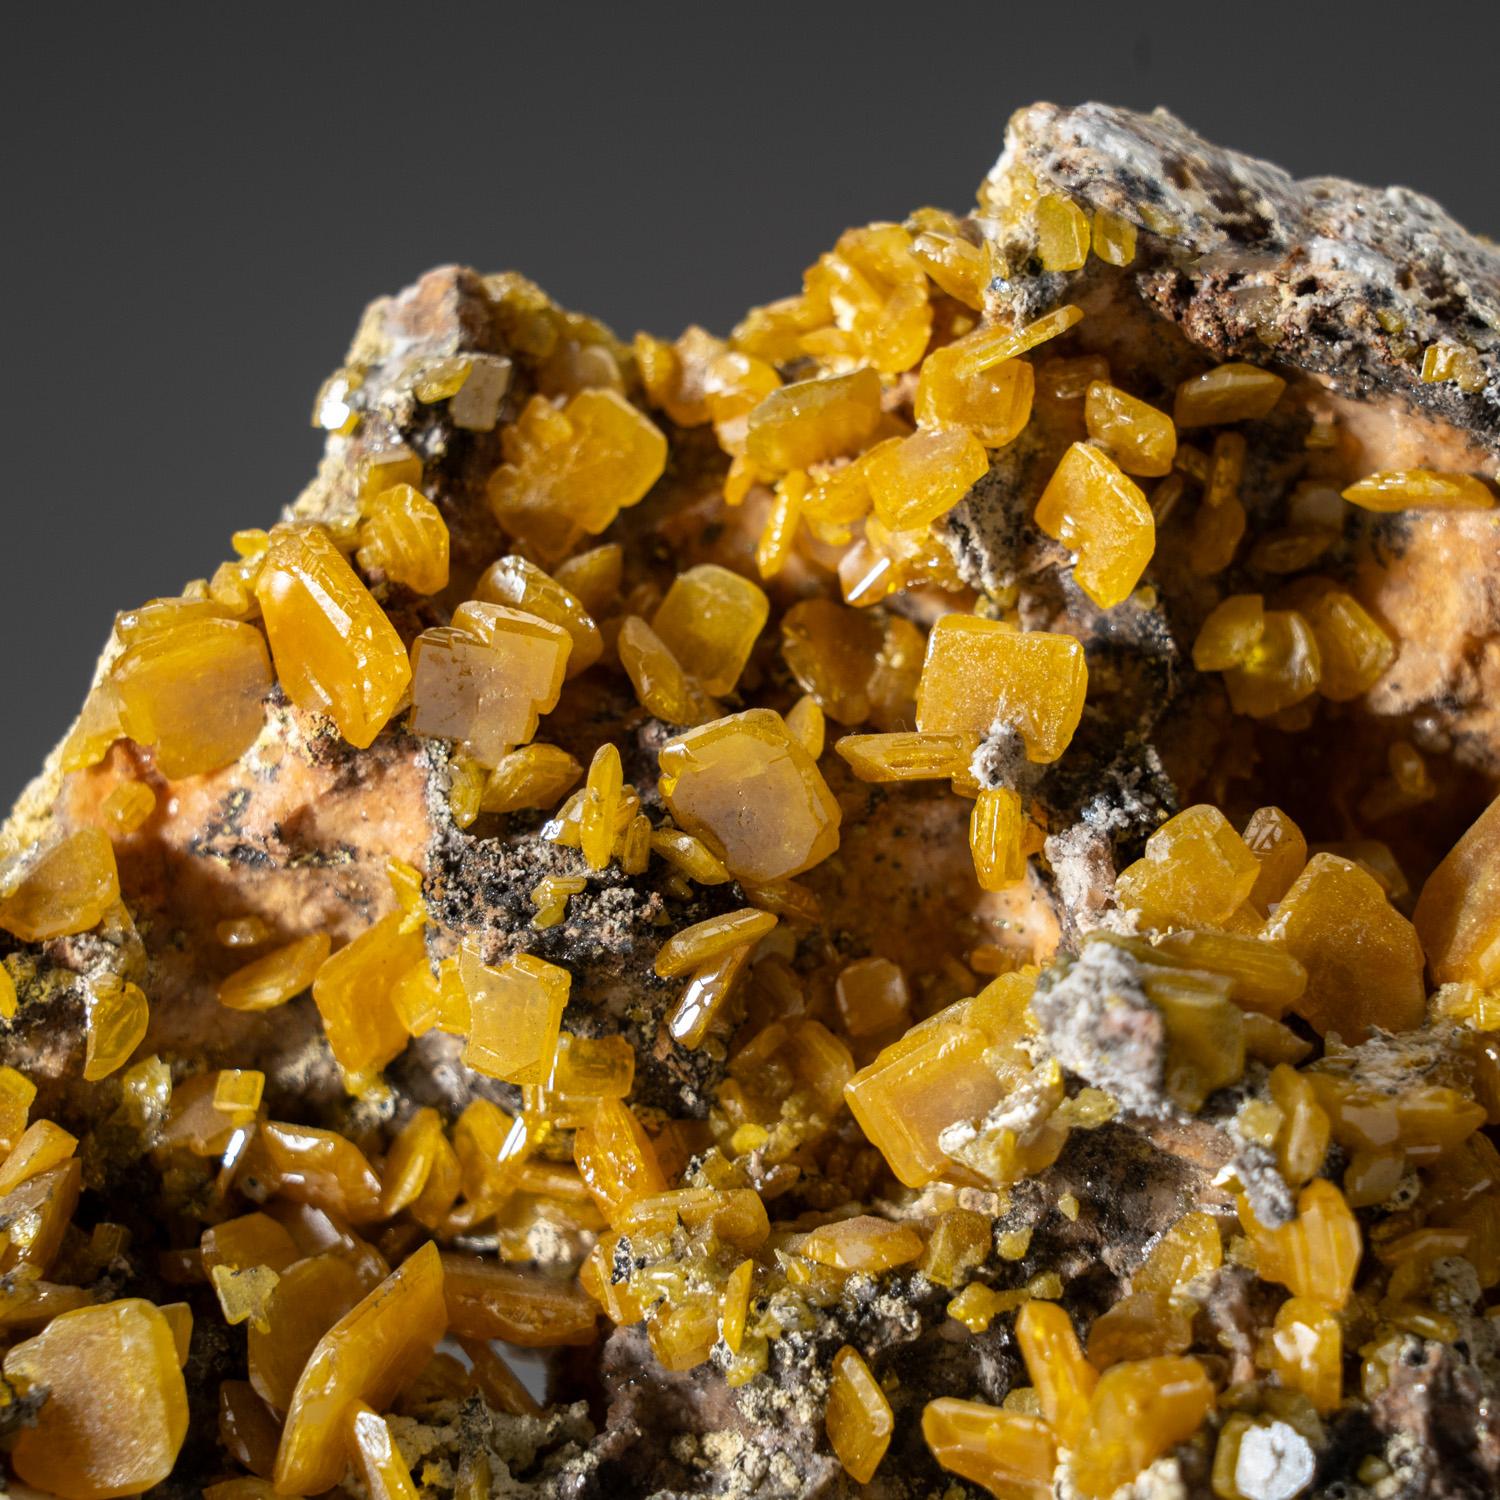 From Touissit Mine, 21 km SSE of Oujda, Jerada Province, Oriental, Morocco

Large cluster of translucent yellow bladed wulfenite crystals over tan-colored matrix. The wulfenite crystals are thin, rectangular form with beveled edge faces and satin